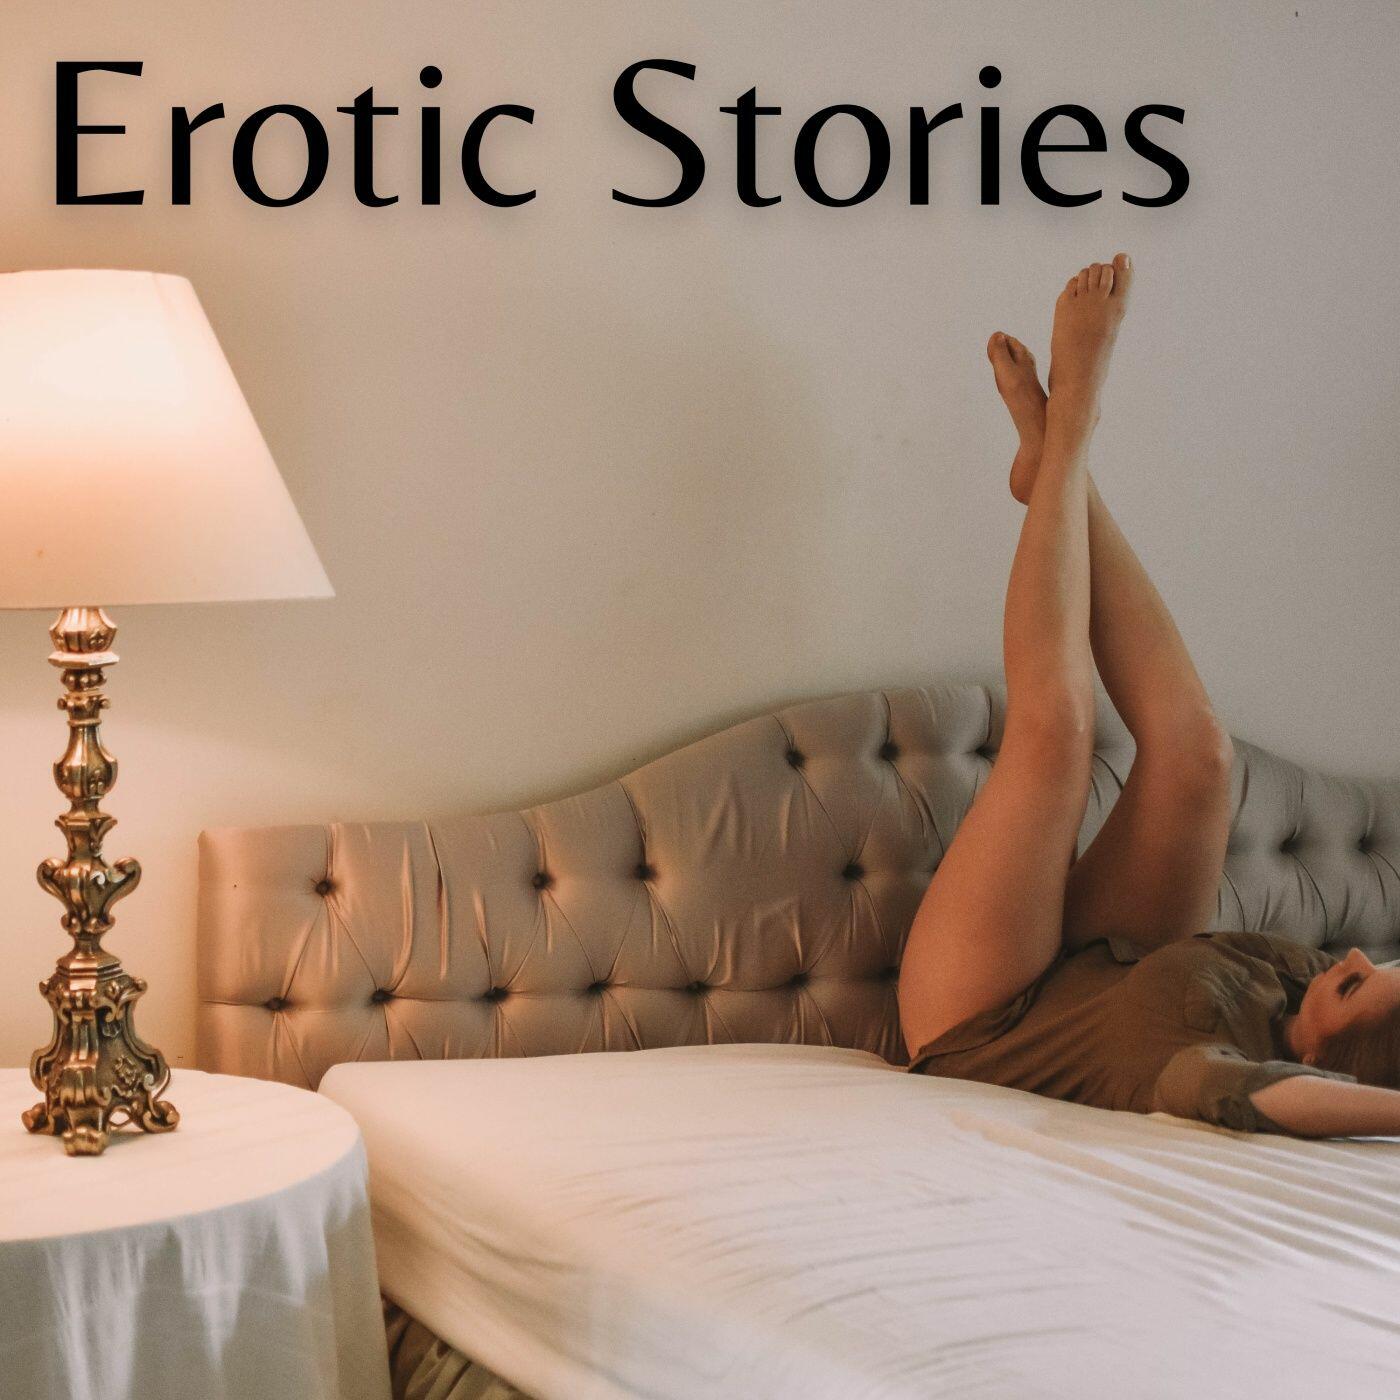 ♫ Erotic Stories Enjoy erotic stories every week for your pleasure! Indulge your wildest fantasies as I read you tantalizing erotic stories every week pic